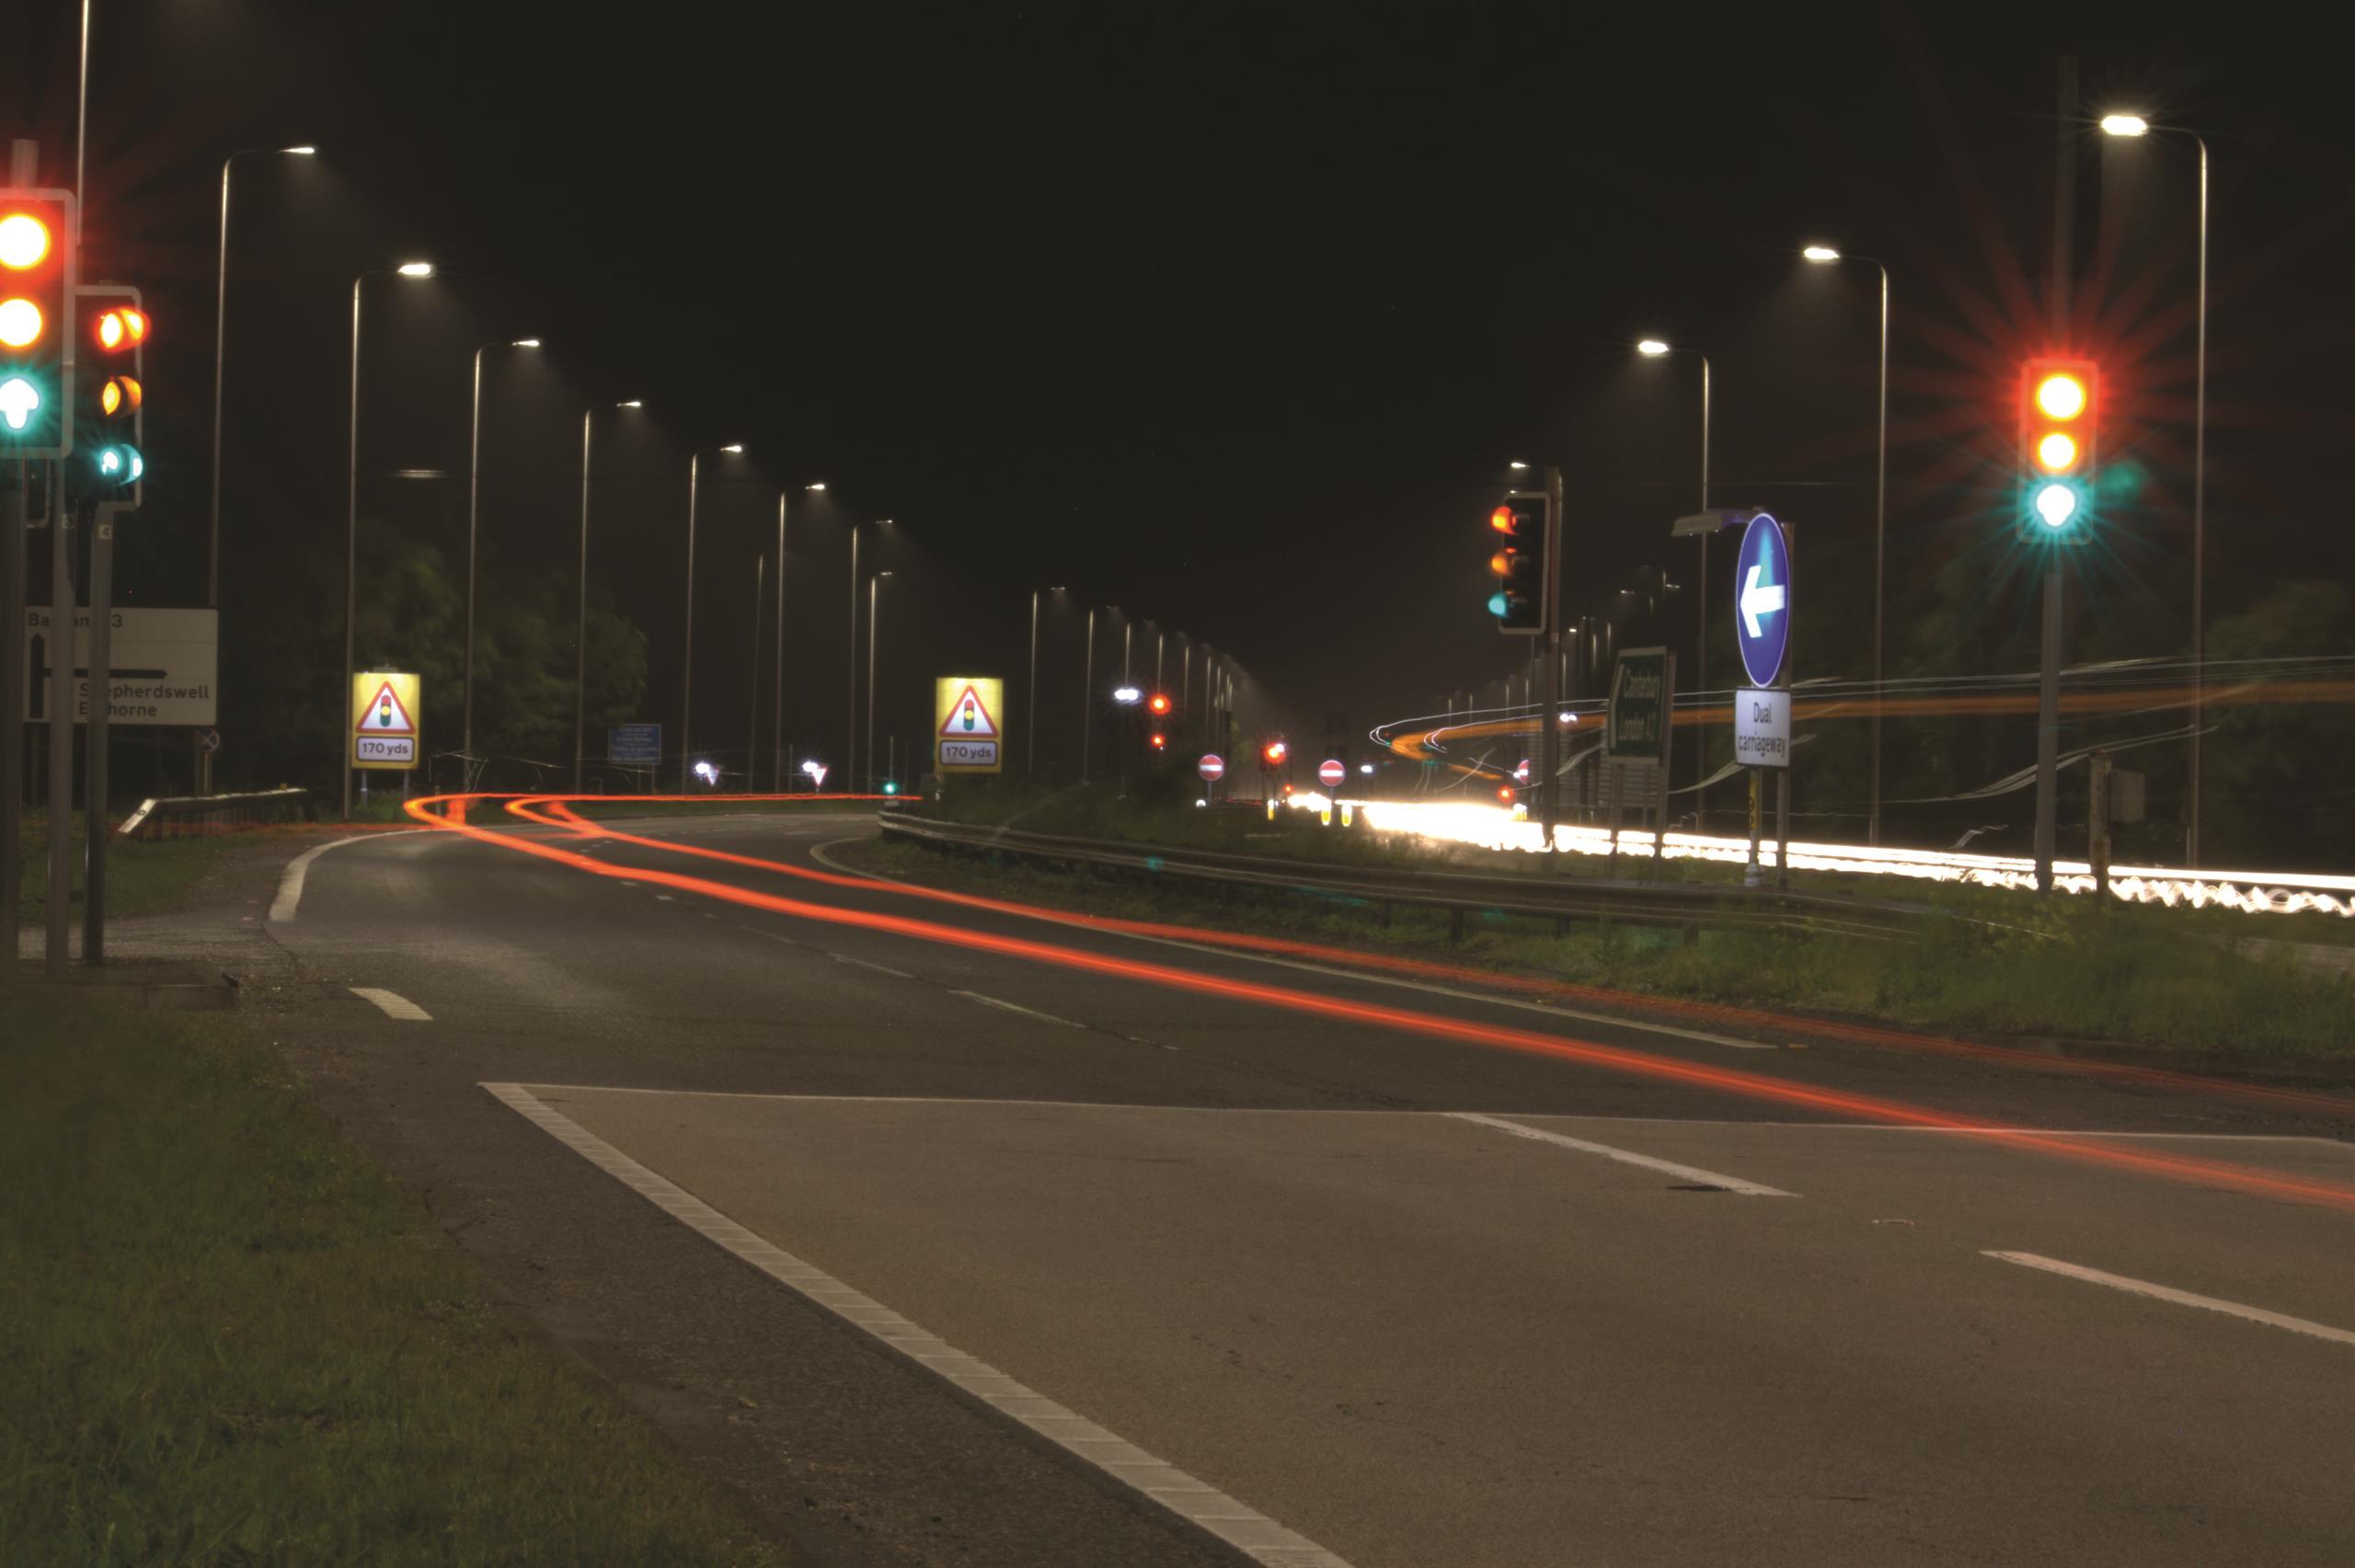 A route lit up on the highway at night